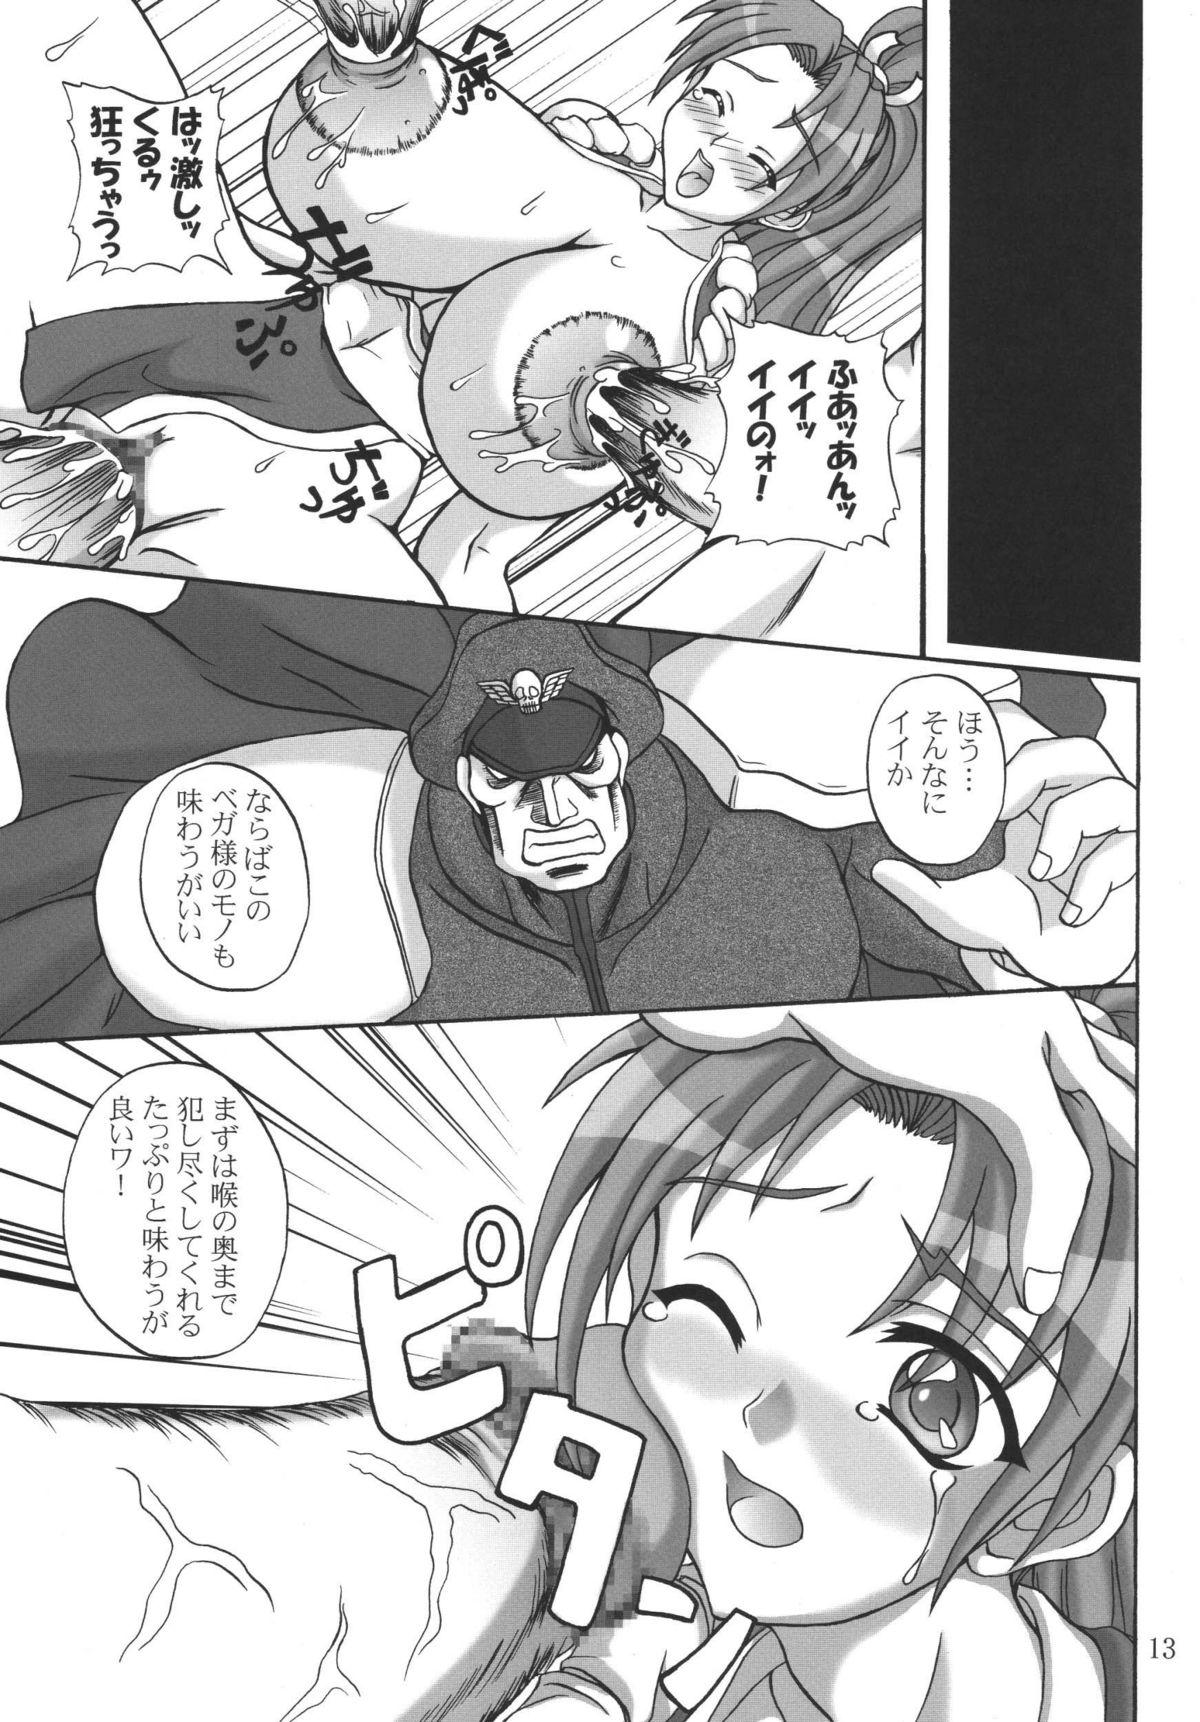 Scandal Insanity - Street fighter King of fighters Spa - Page 12